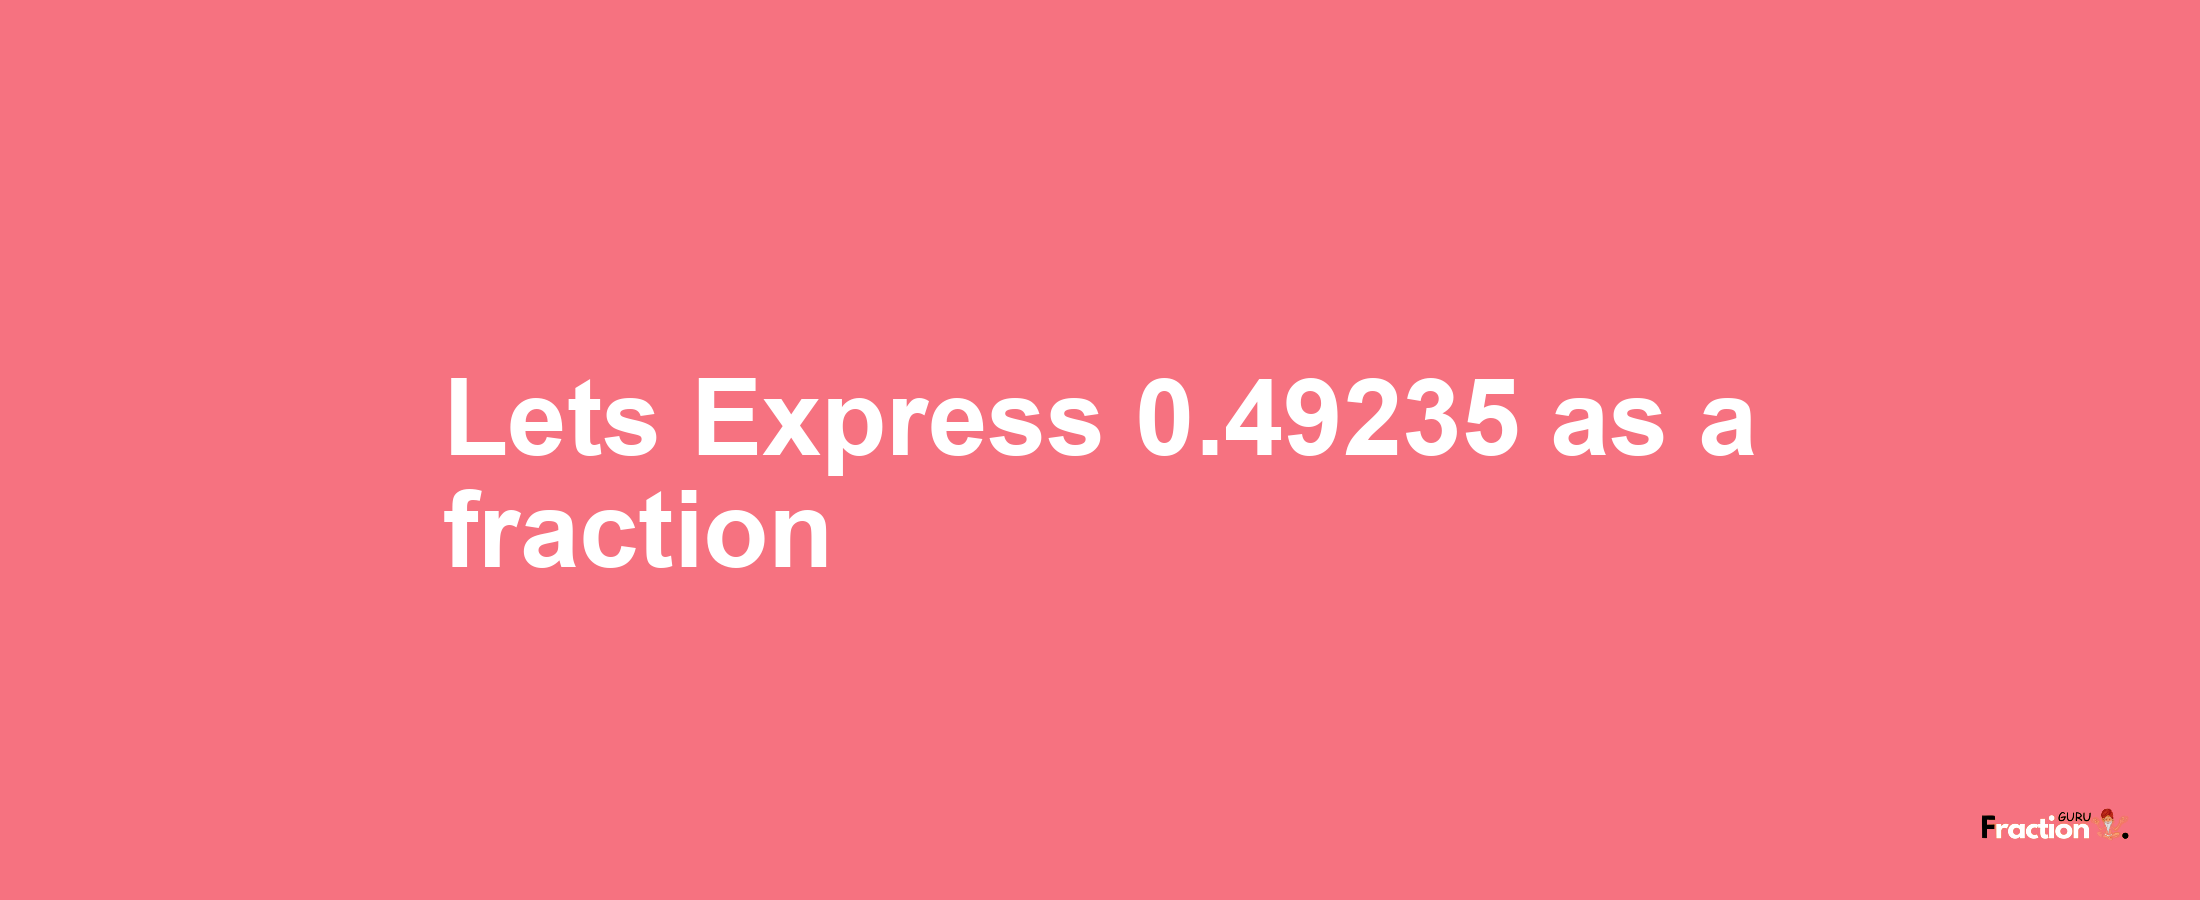 Lets Express 0.49235 as afraction